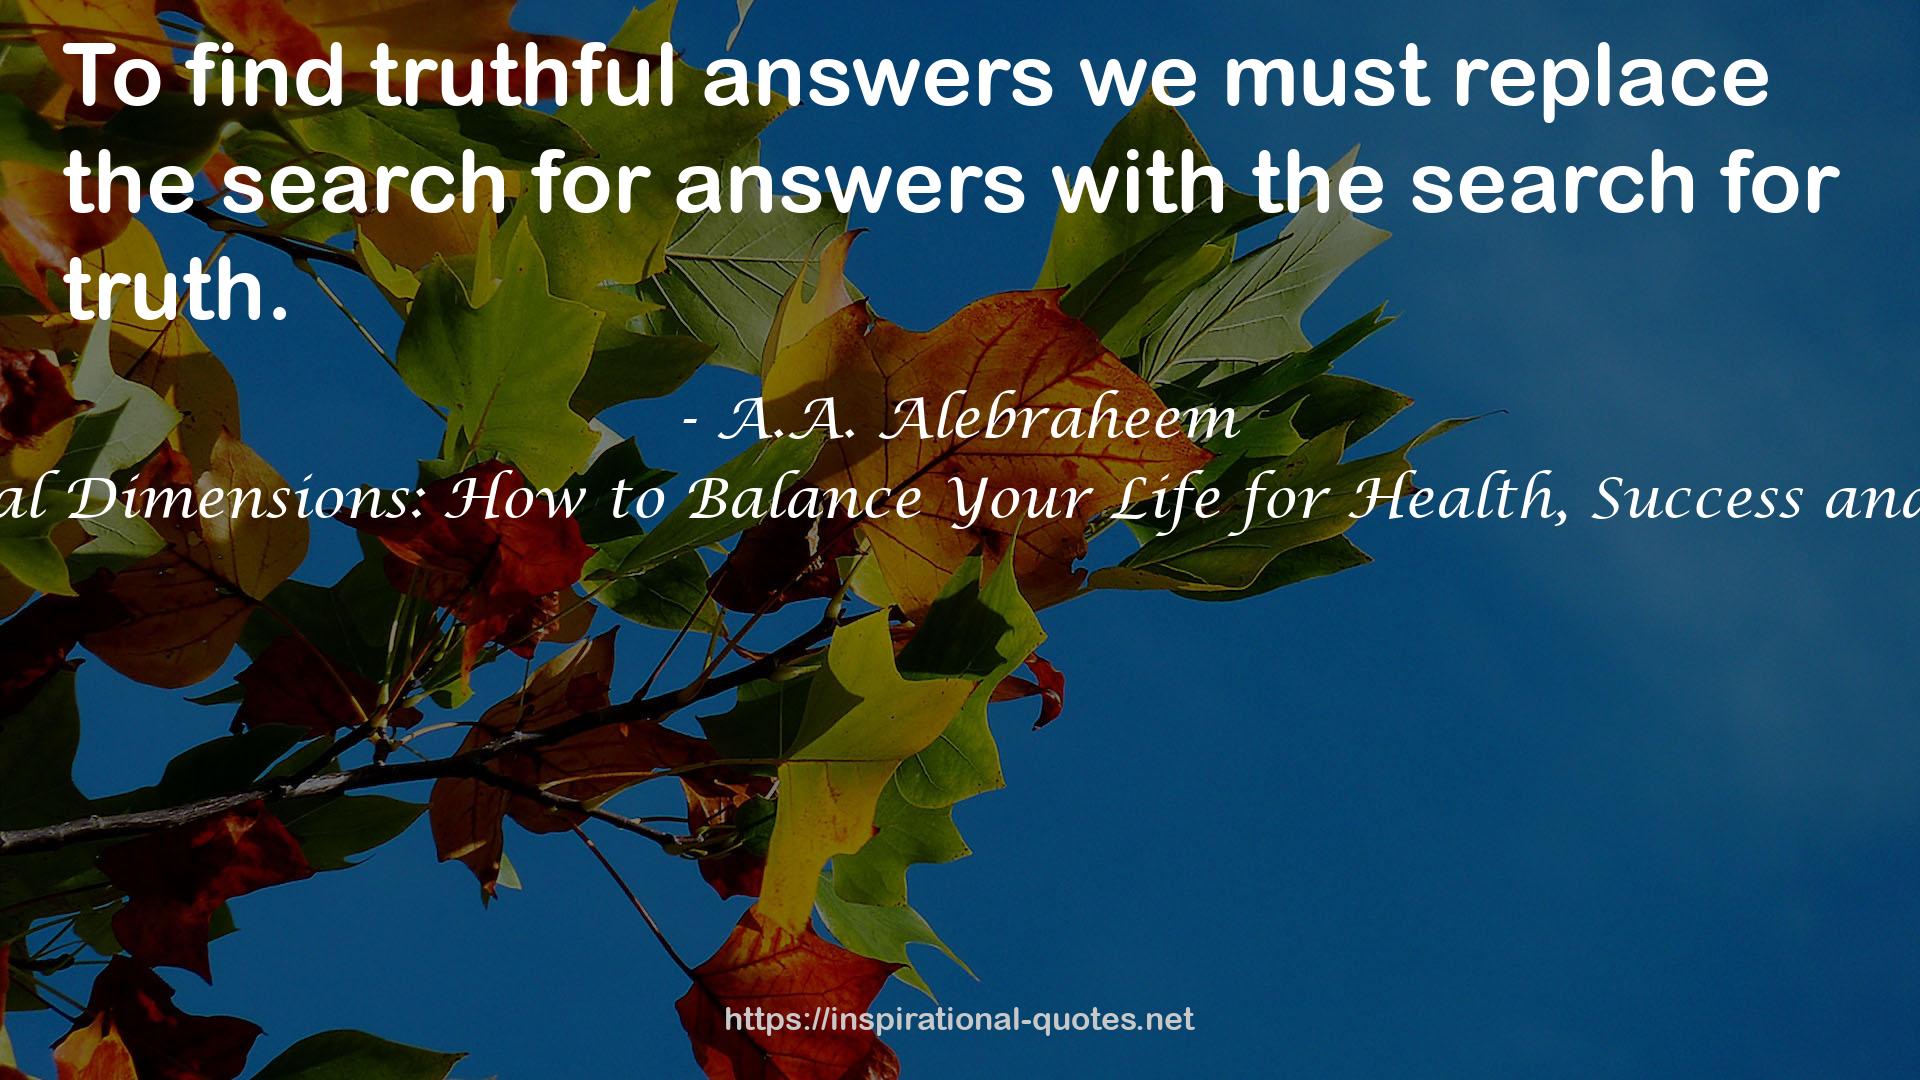 5 Essential Dimensions: How to Balance Your Life for Health, Success and Content QUOTES